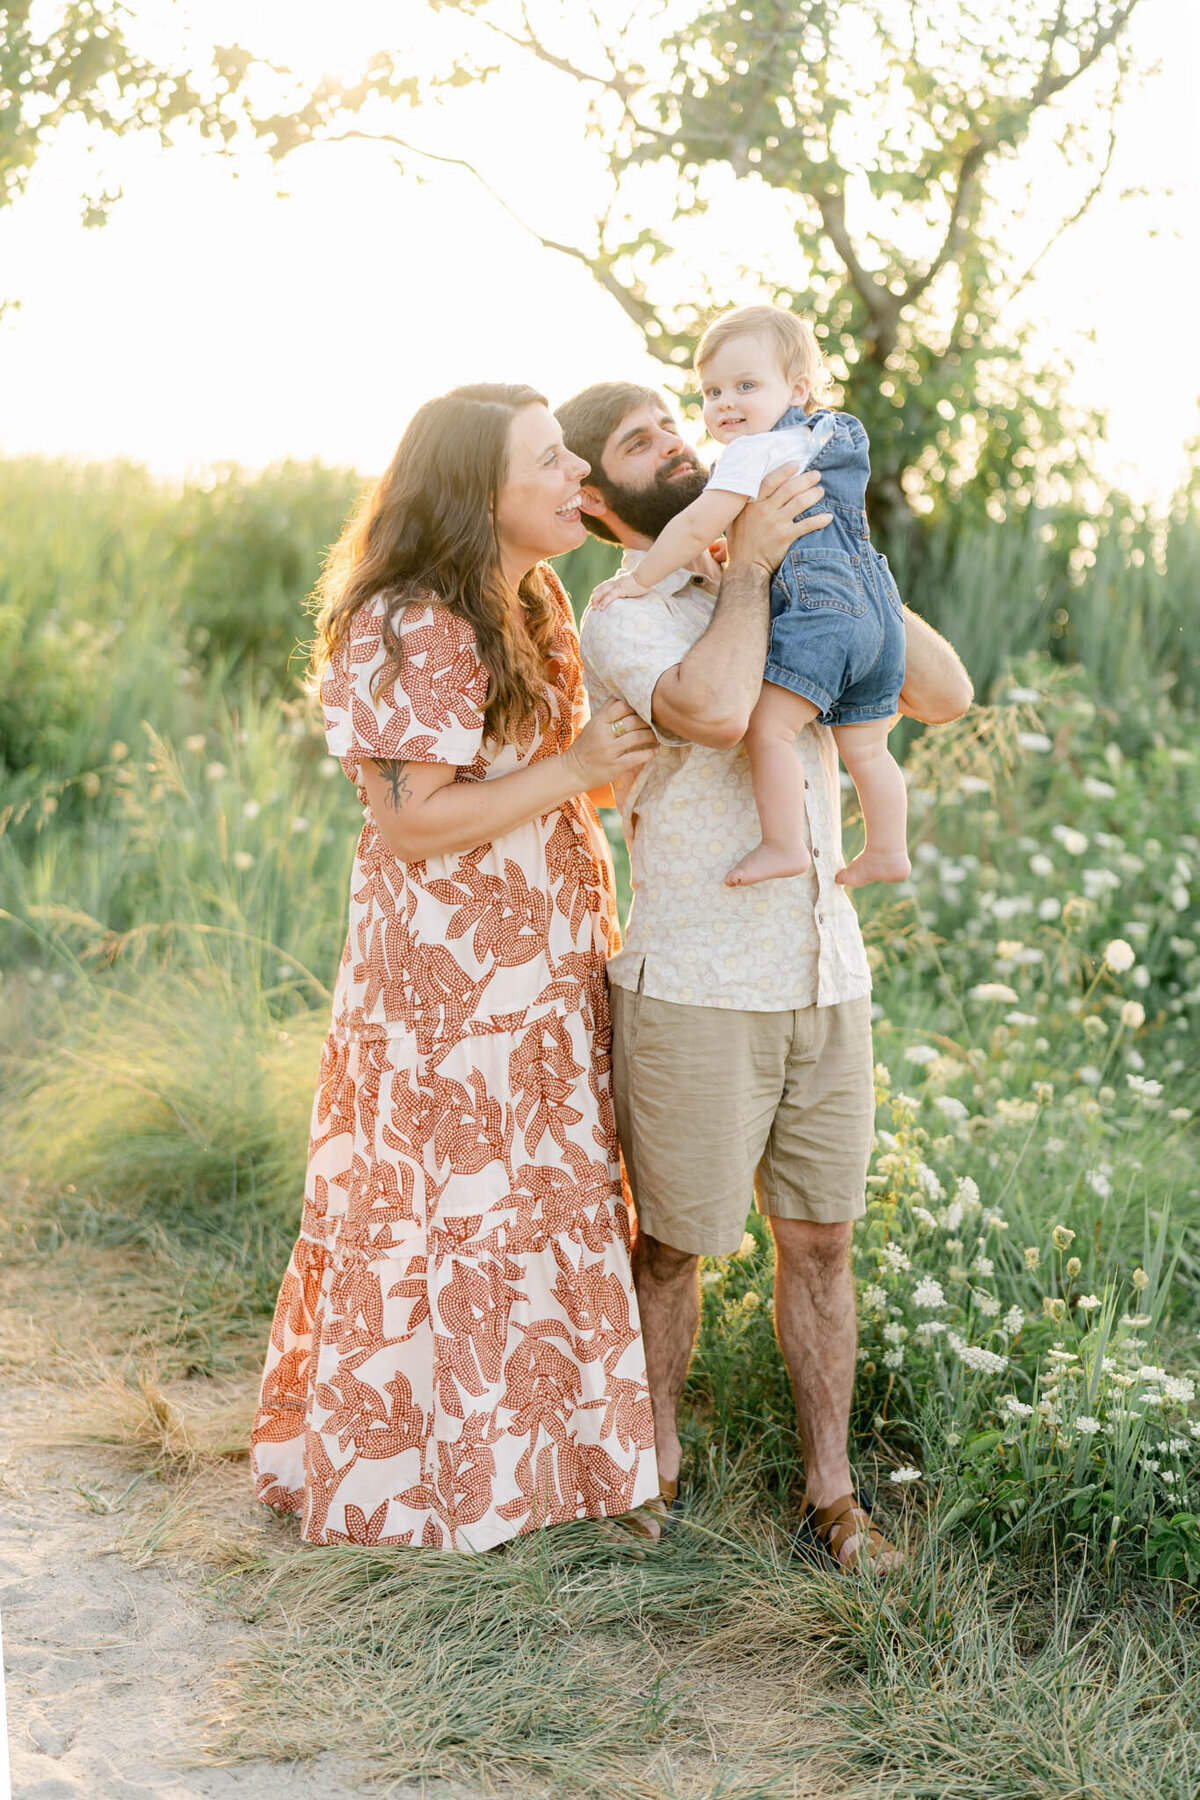 husband and wife hold baby boy in a field of wildflowers at sunset